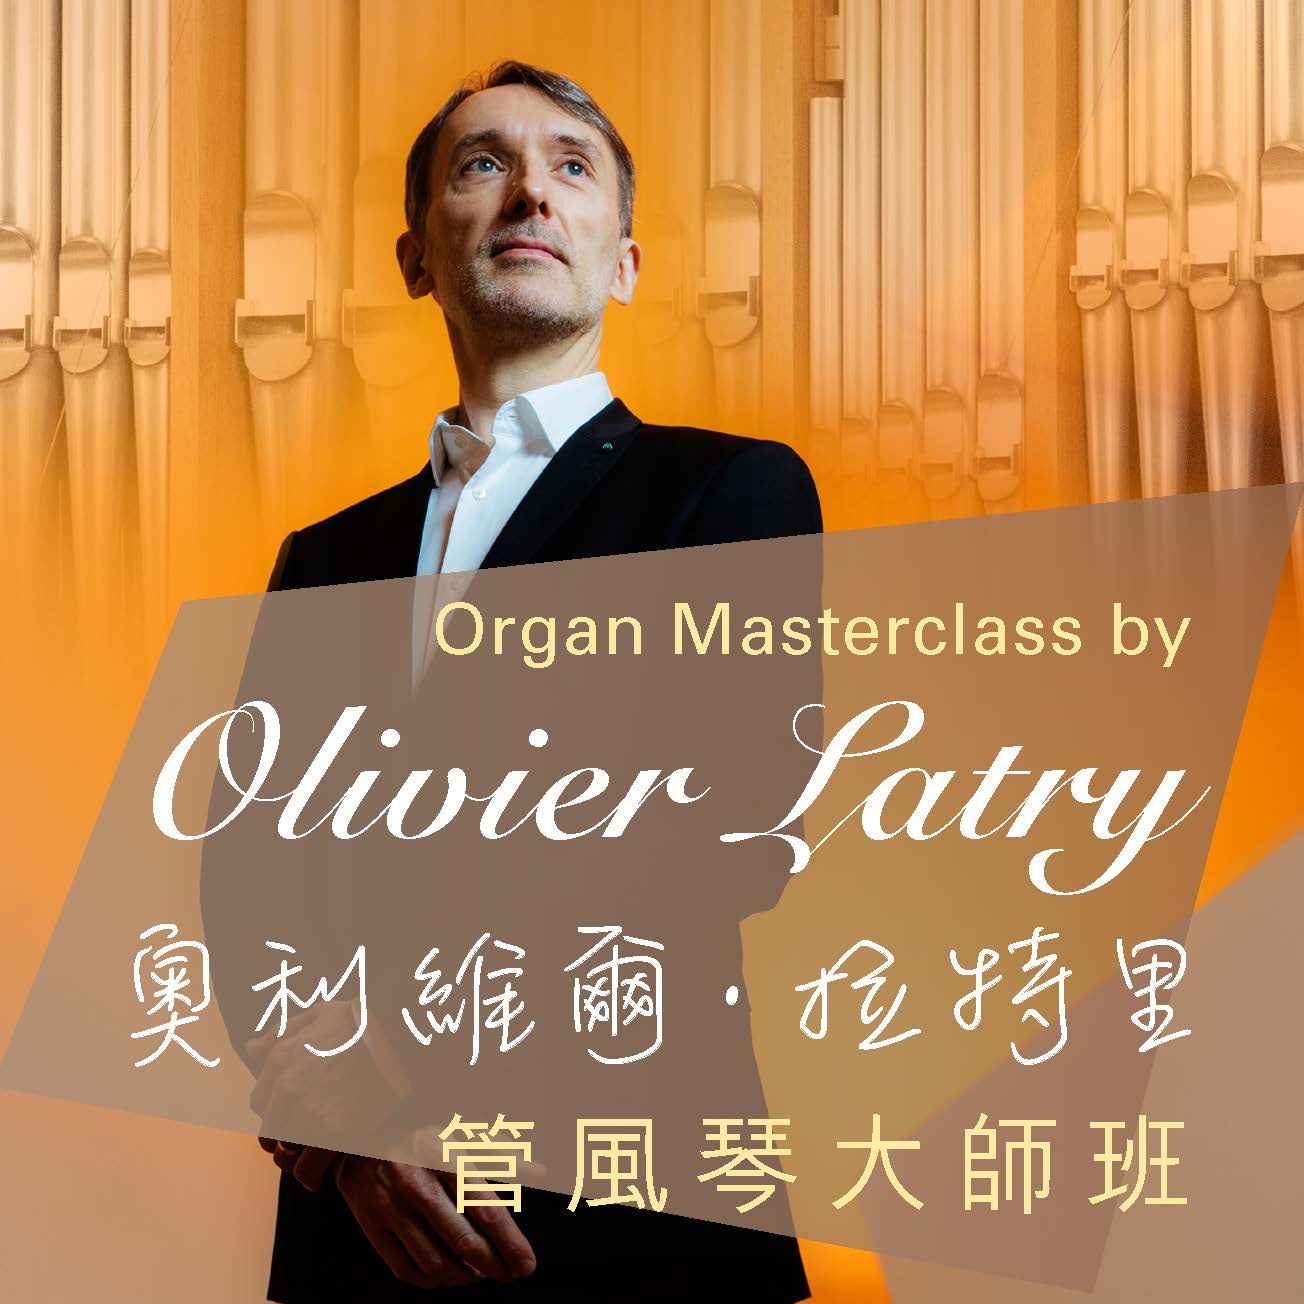 Organ Masterclass by Olivier Latry (Conducted in English)